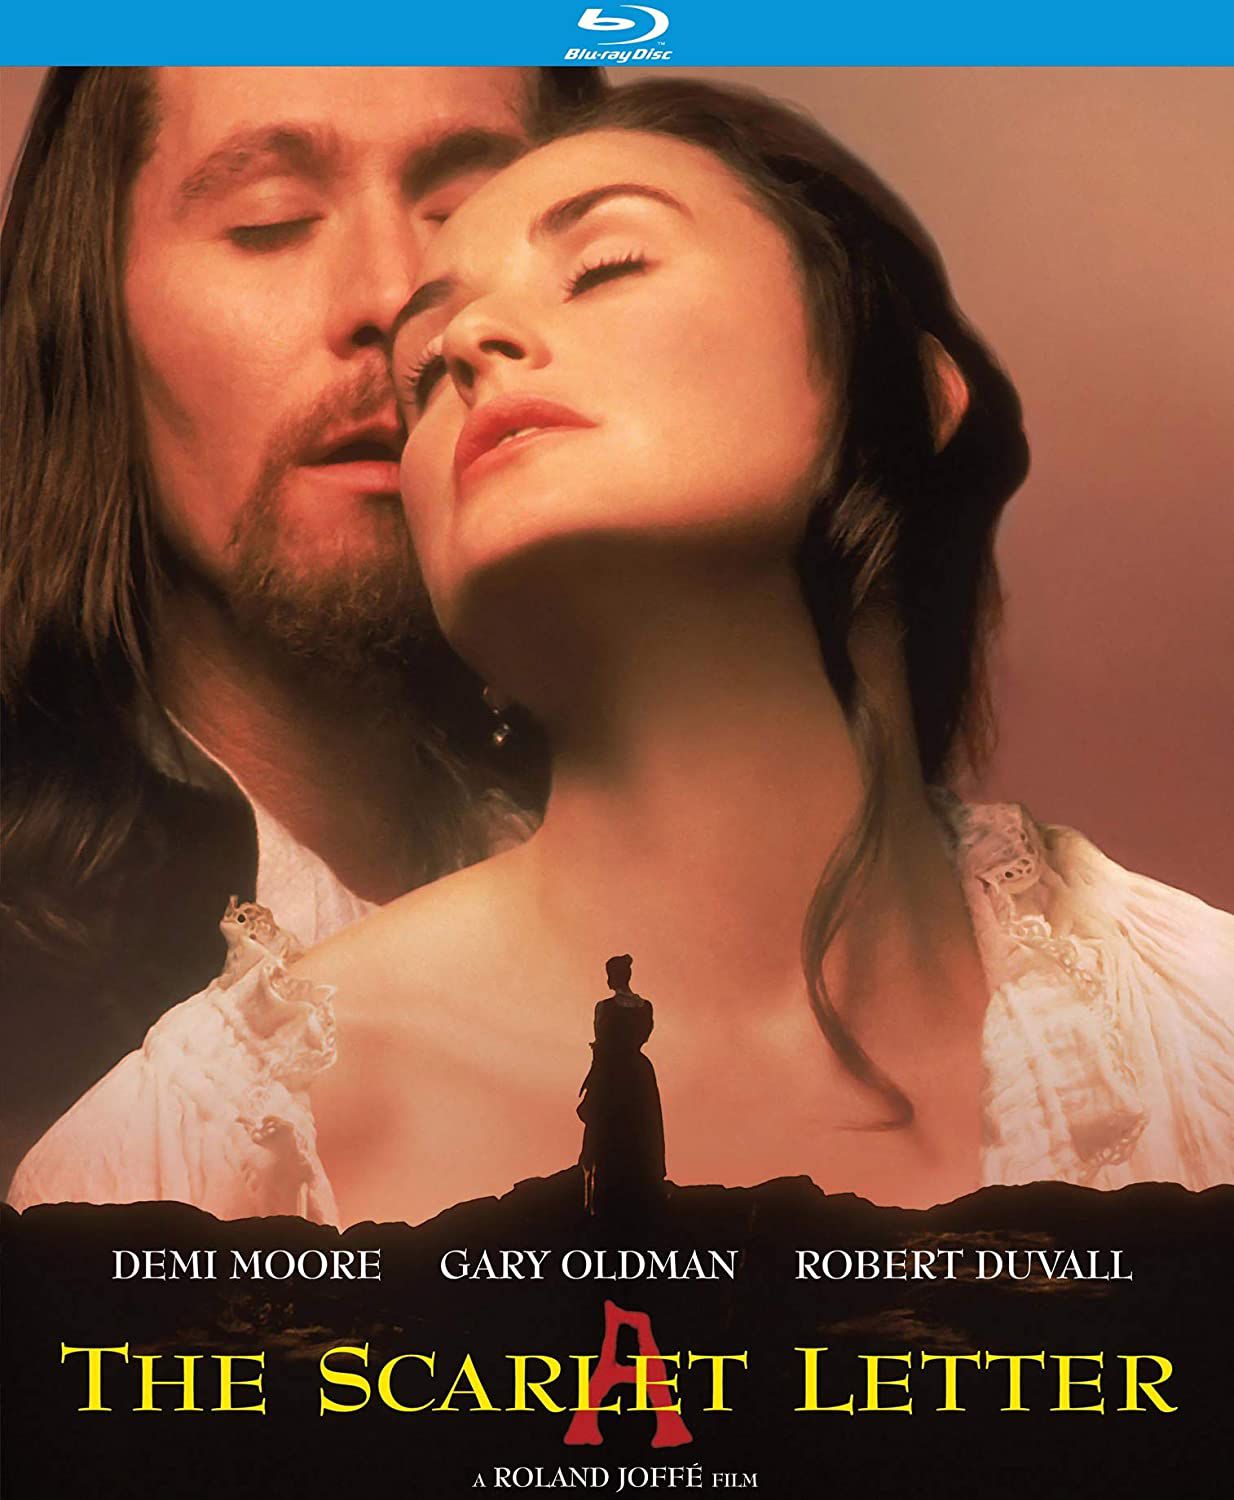 <p><b>Film Adaptation: “The Scarlet Letter” (1995)</b></p><p><b>Critic Quote: </b>“Read the book. Forget this movie.” — CNN</p><p>Arguably one of the most well-known stories of all time, Nathaniel Hawthorne’s “The Scarlet Letter” completely falters from the original intention of the story and deviates to an over-sexualized romance instead. Even stars Demi Moore and Gary Oldman as the unlucky lovers can do nothing to salvage this mangled interpretation.</p><p><b>Related:</b> <a href="https://blog.cheapism.com/cult-movies/">33 Cult Films We Can’t Stop Watching</a></p>